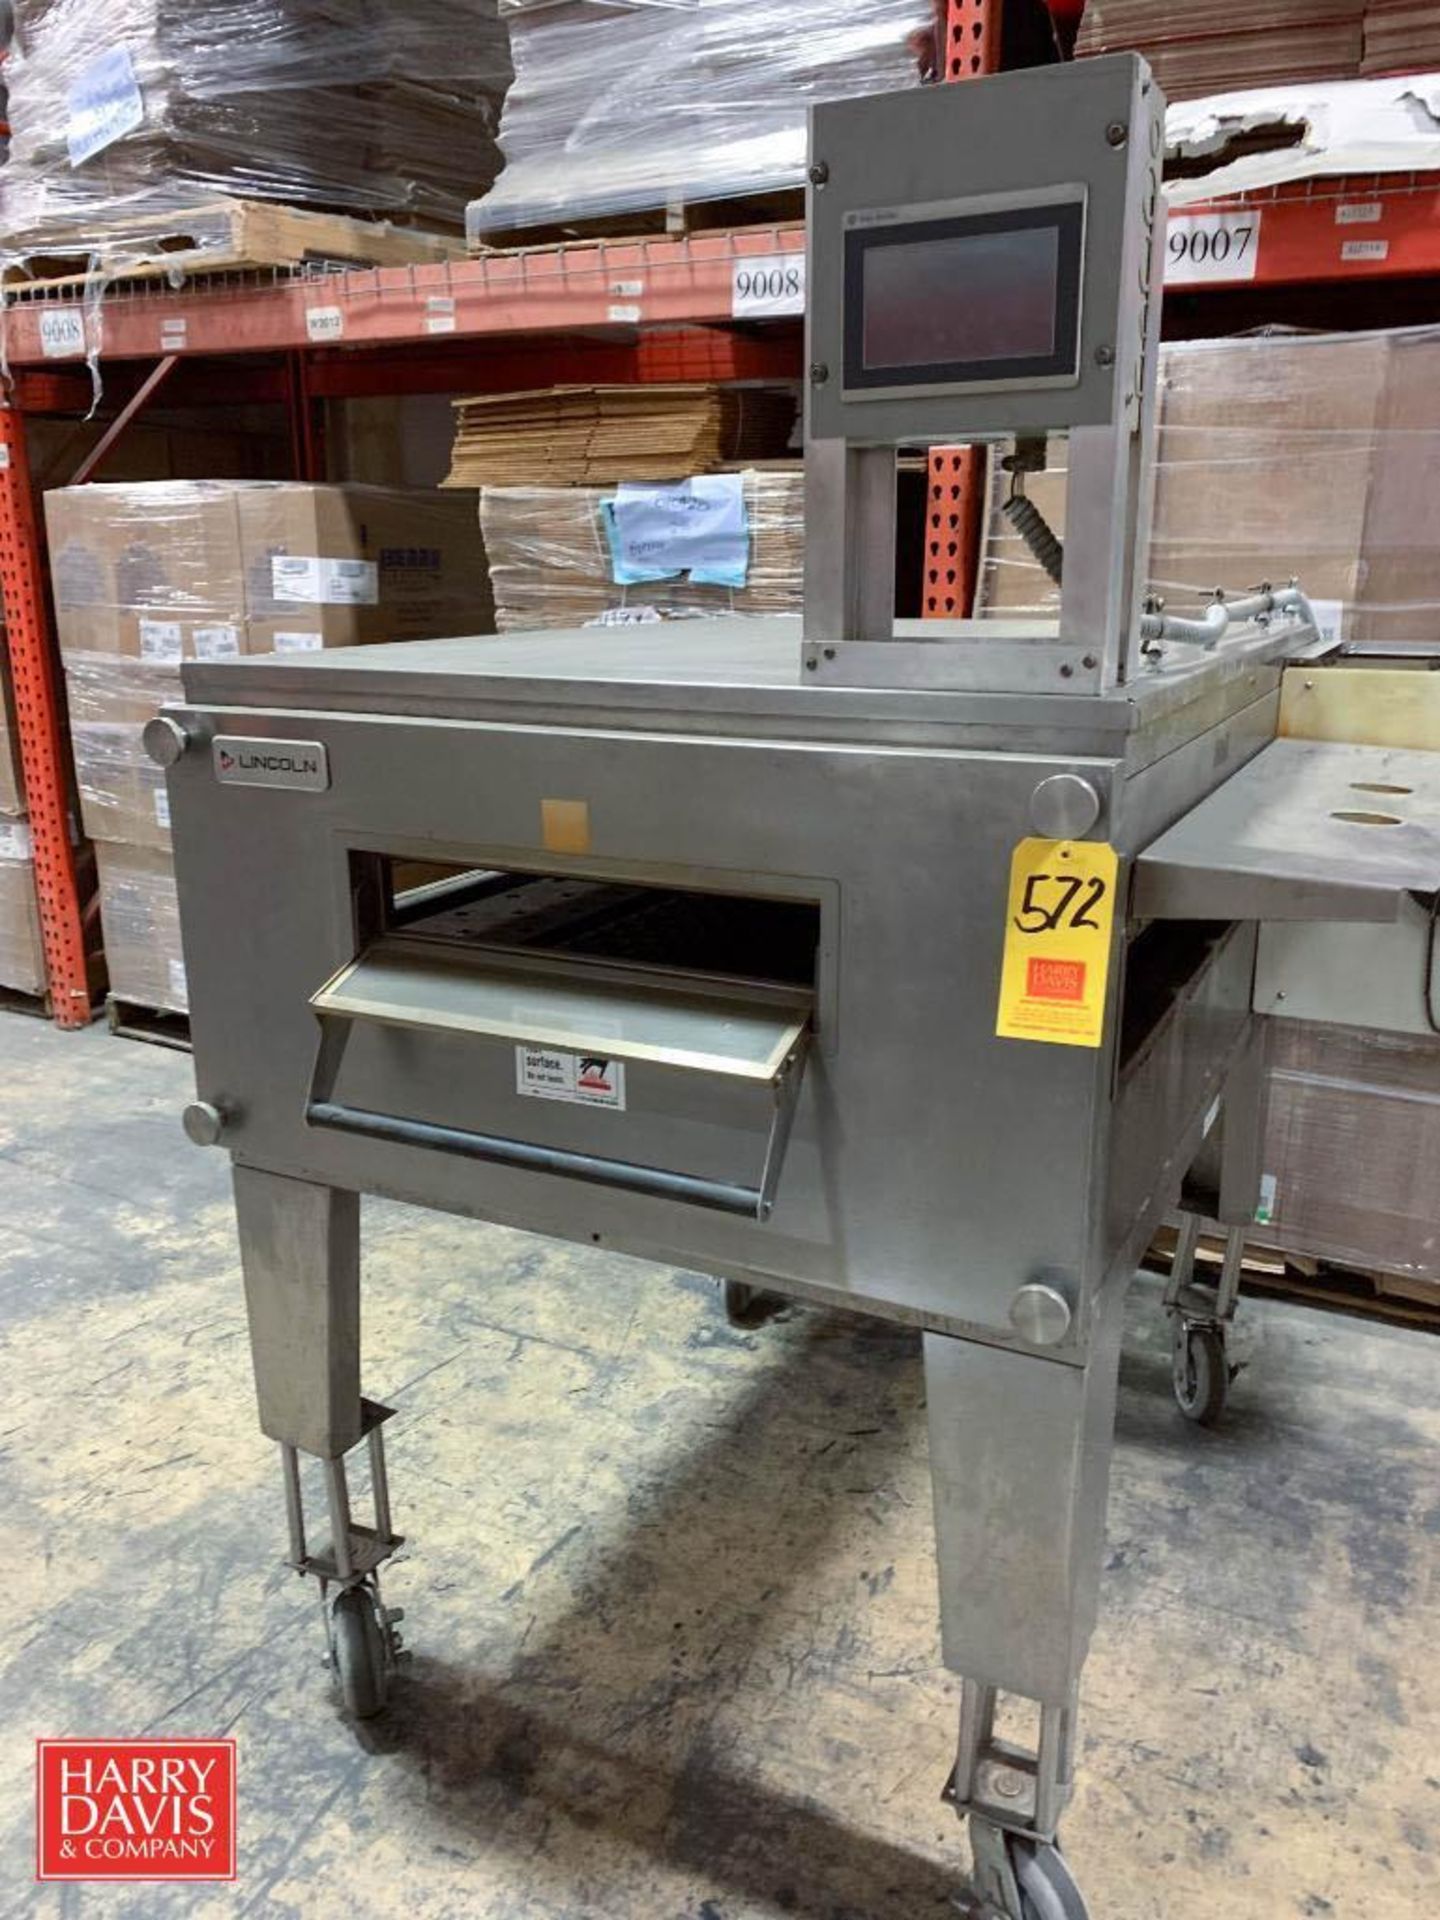 Lincoln S/S Electronic Oven, Model: 3240-000R-K2350, S/N: 19121000100701 (Location: Edison, NJ)